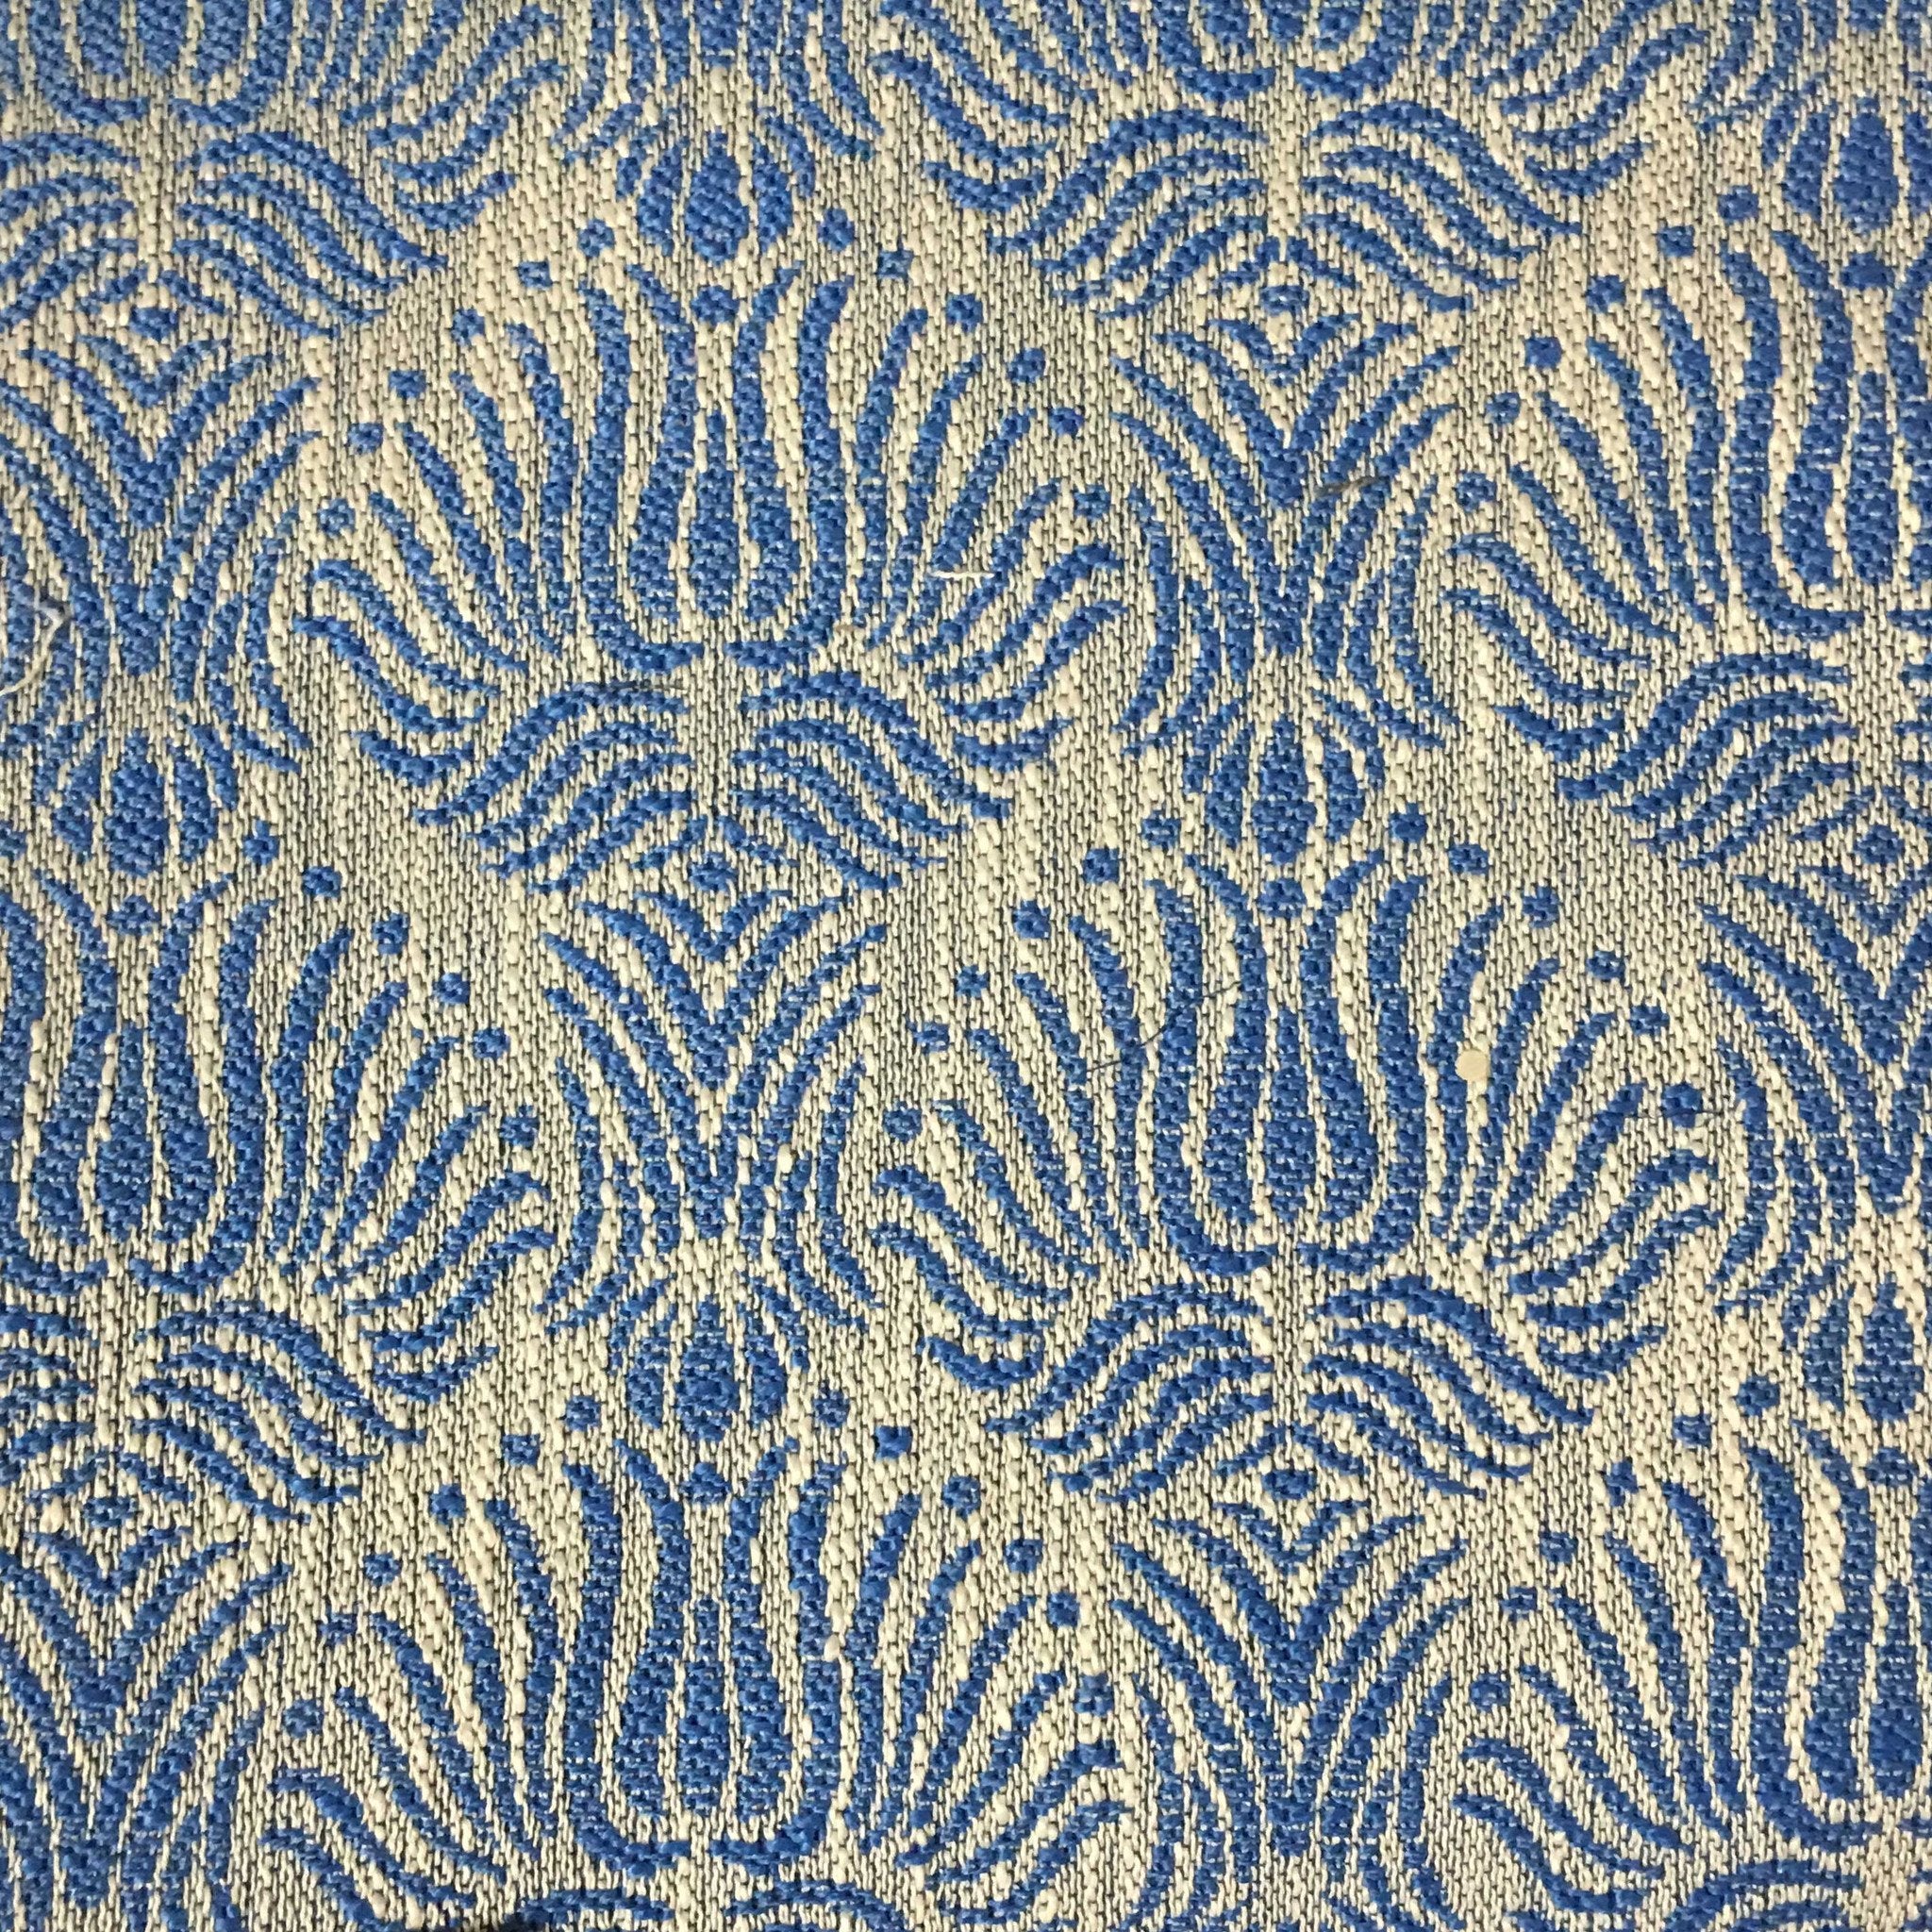 GRAMERCY - DESIGNER PATTERN JACQUARD WOVEN UPHOLSTERY FABRIC BY THE YARD